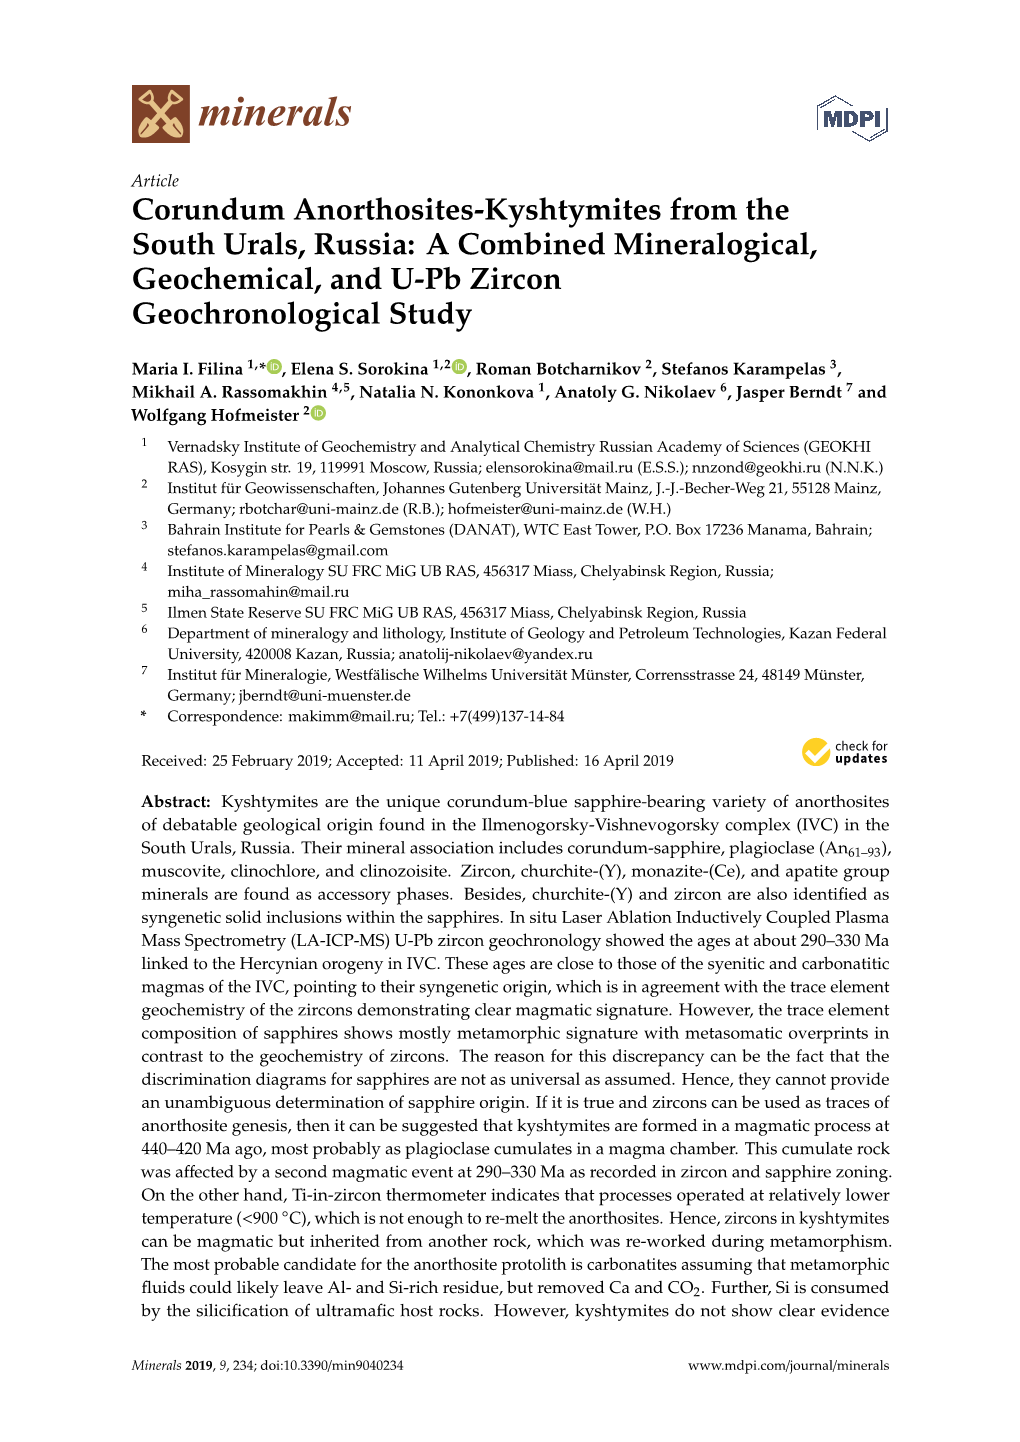 Corundum Anorthosites-Kyshtymites from the South Urals, Russia: a Combined Mineralogical, Geochemical, and U-Pb Zircon Geochronological Study